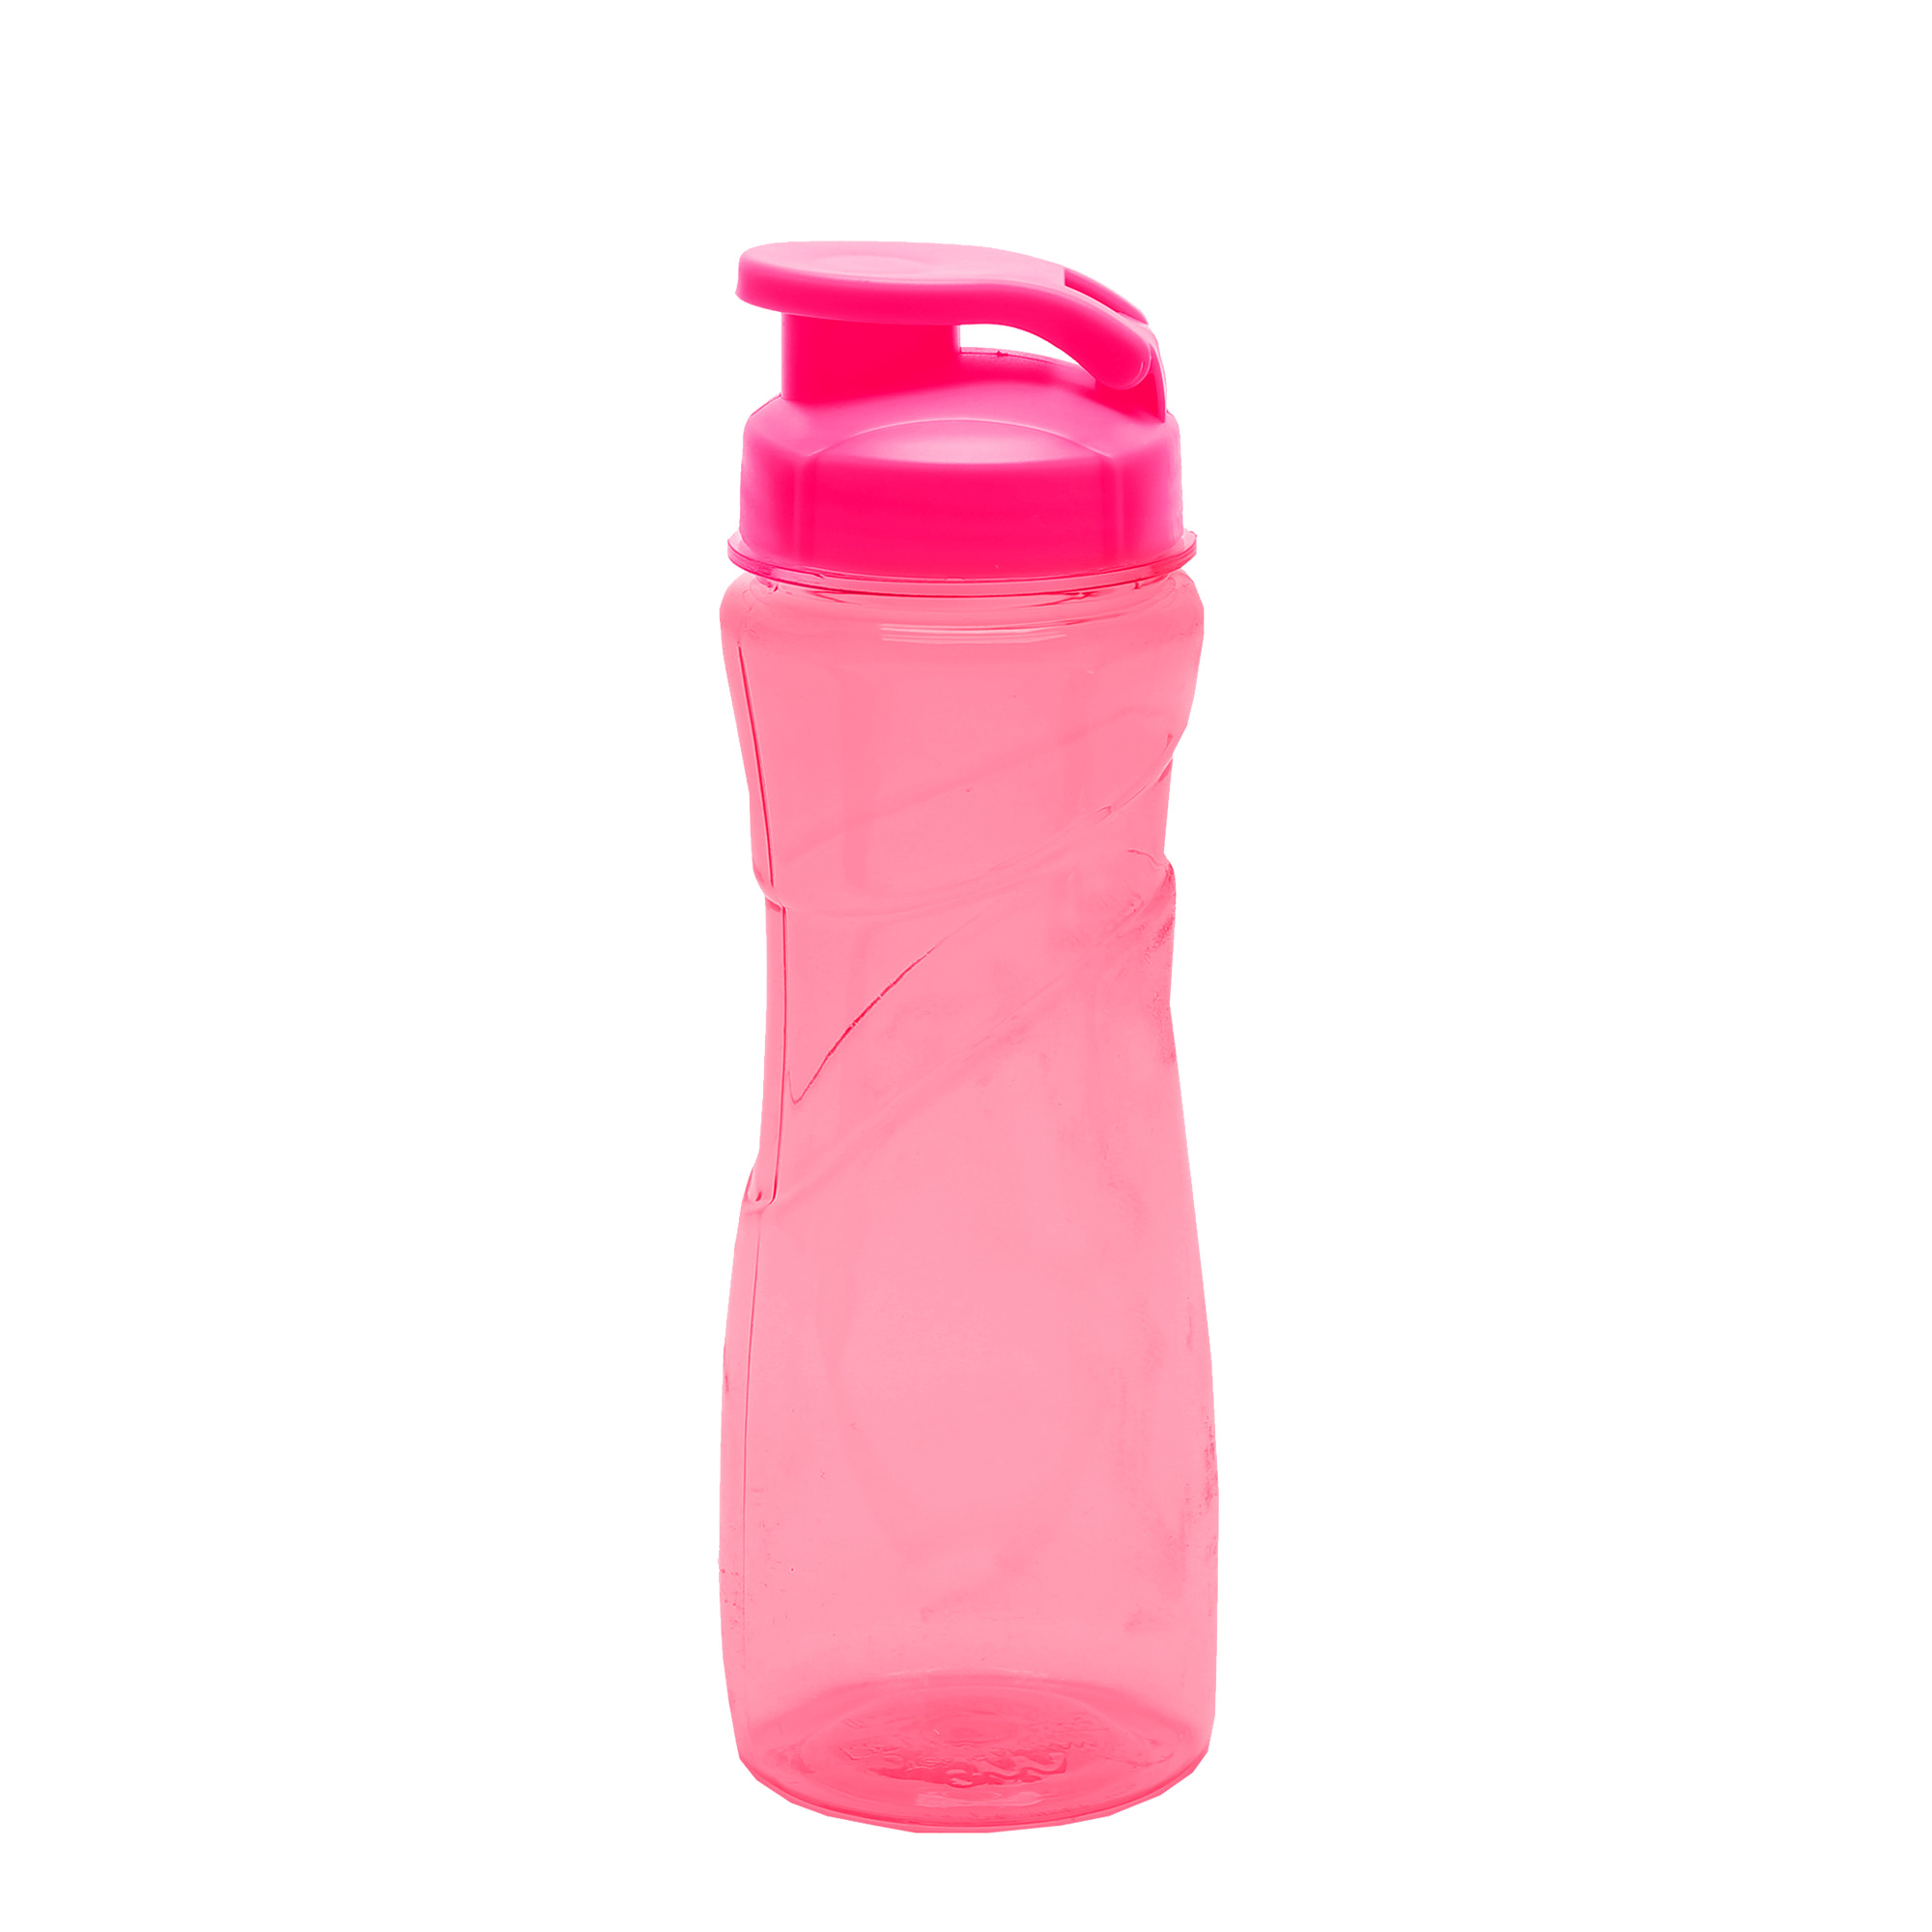  Squeeze Ceará 500 Ml - Rosa Pink